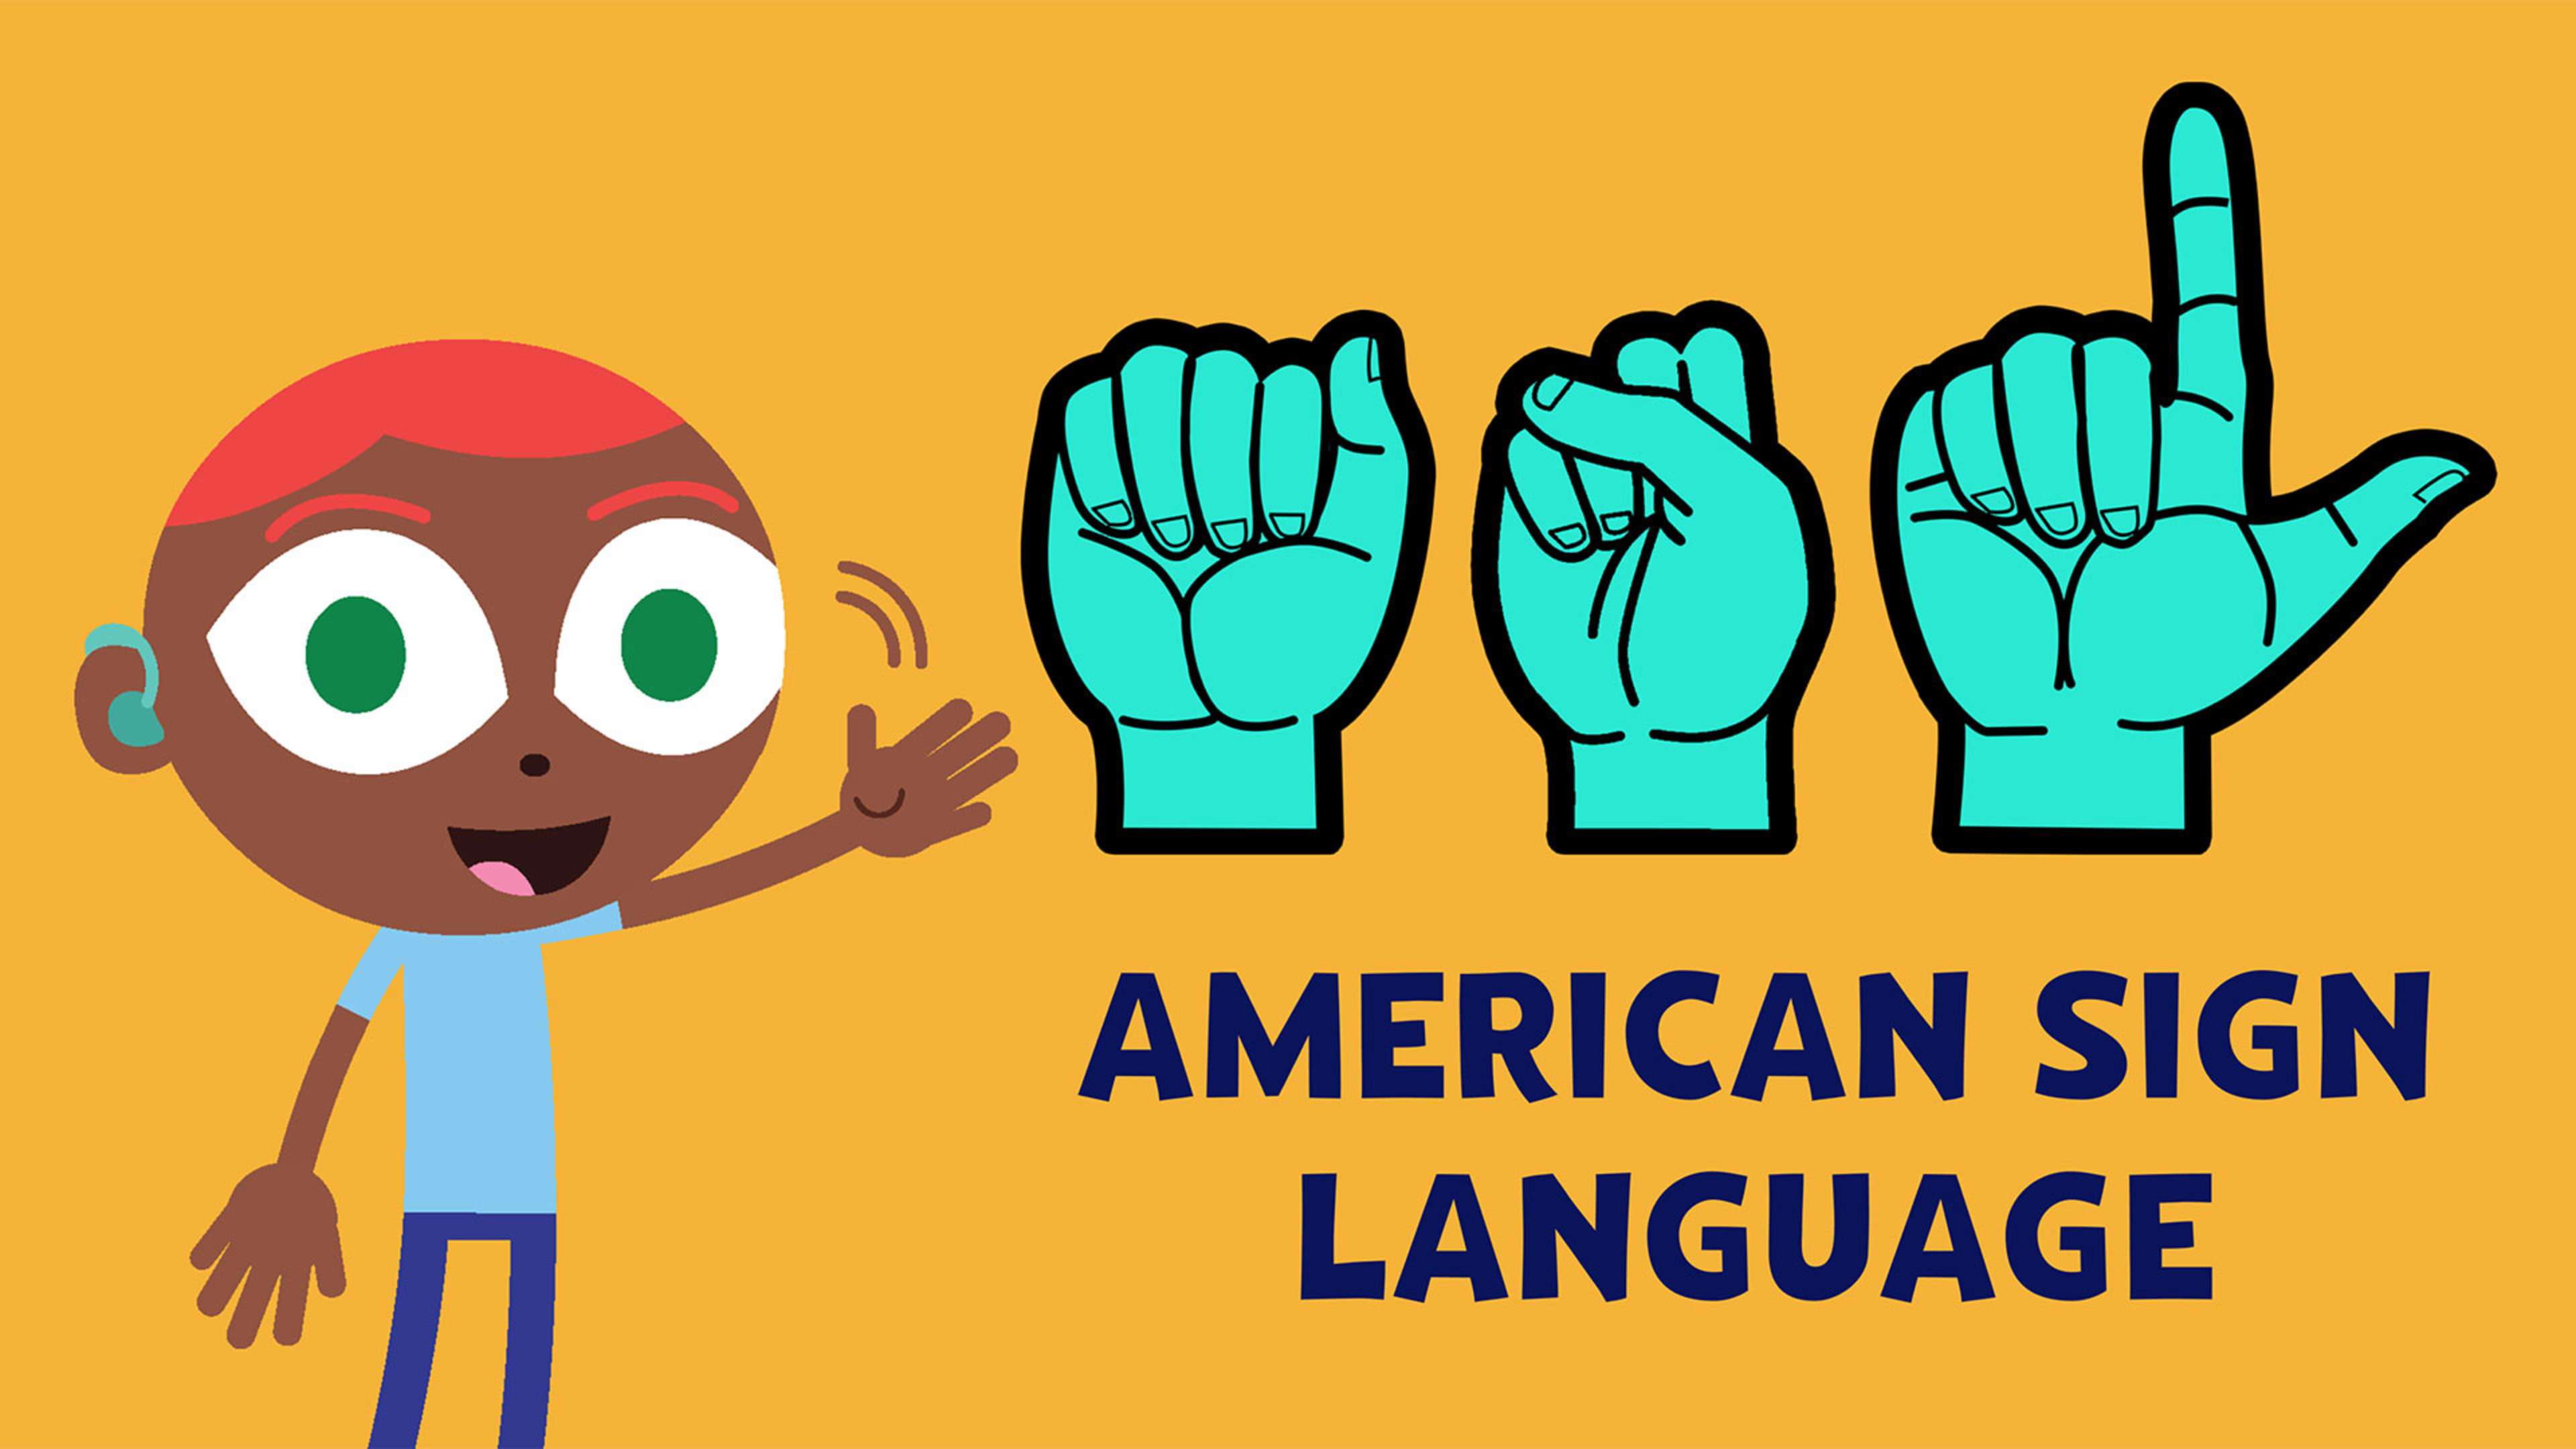 PBS Kids adds American Sign Language interpreters to some of its children’s shows